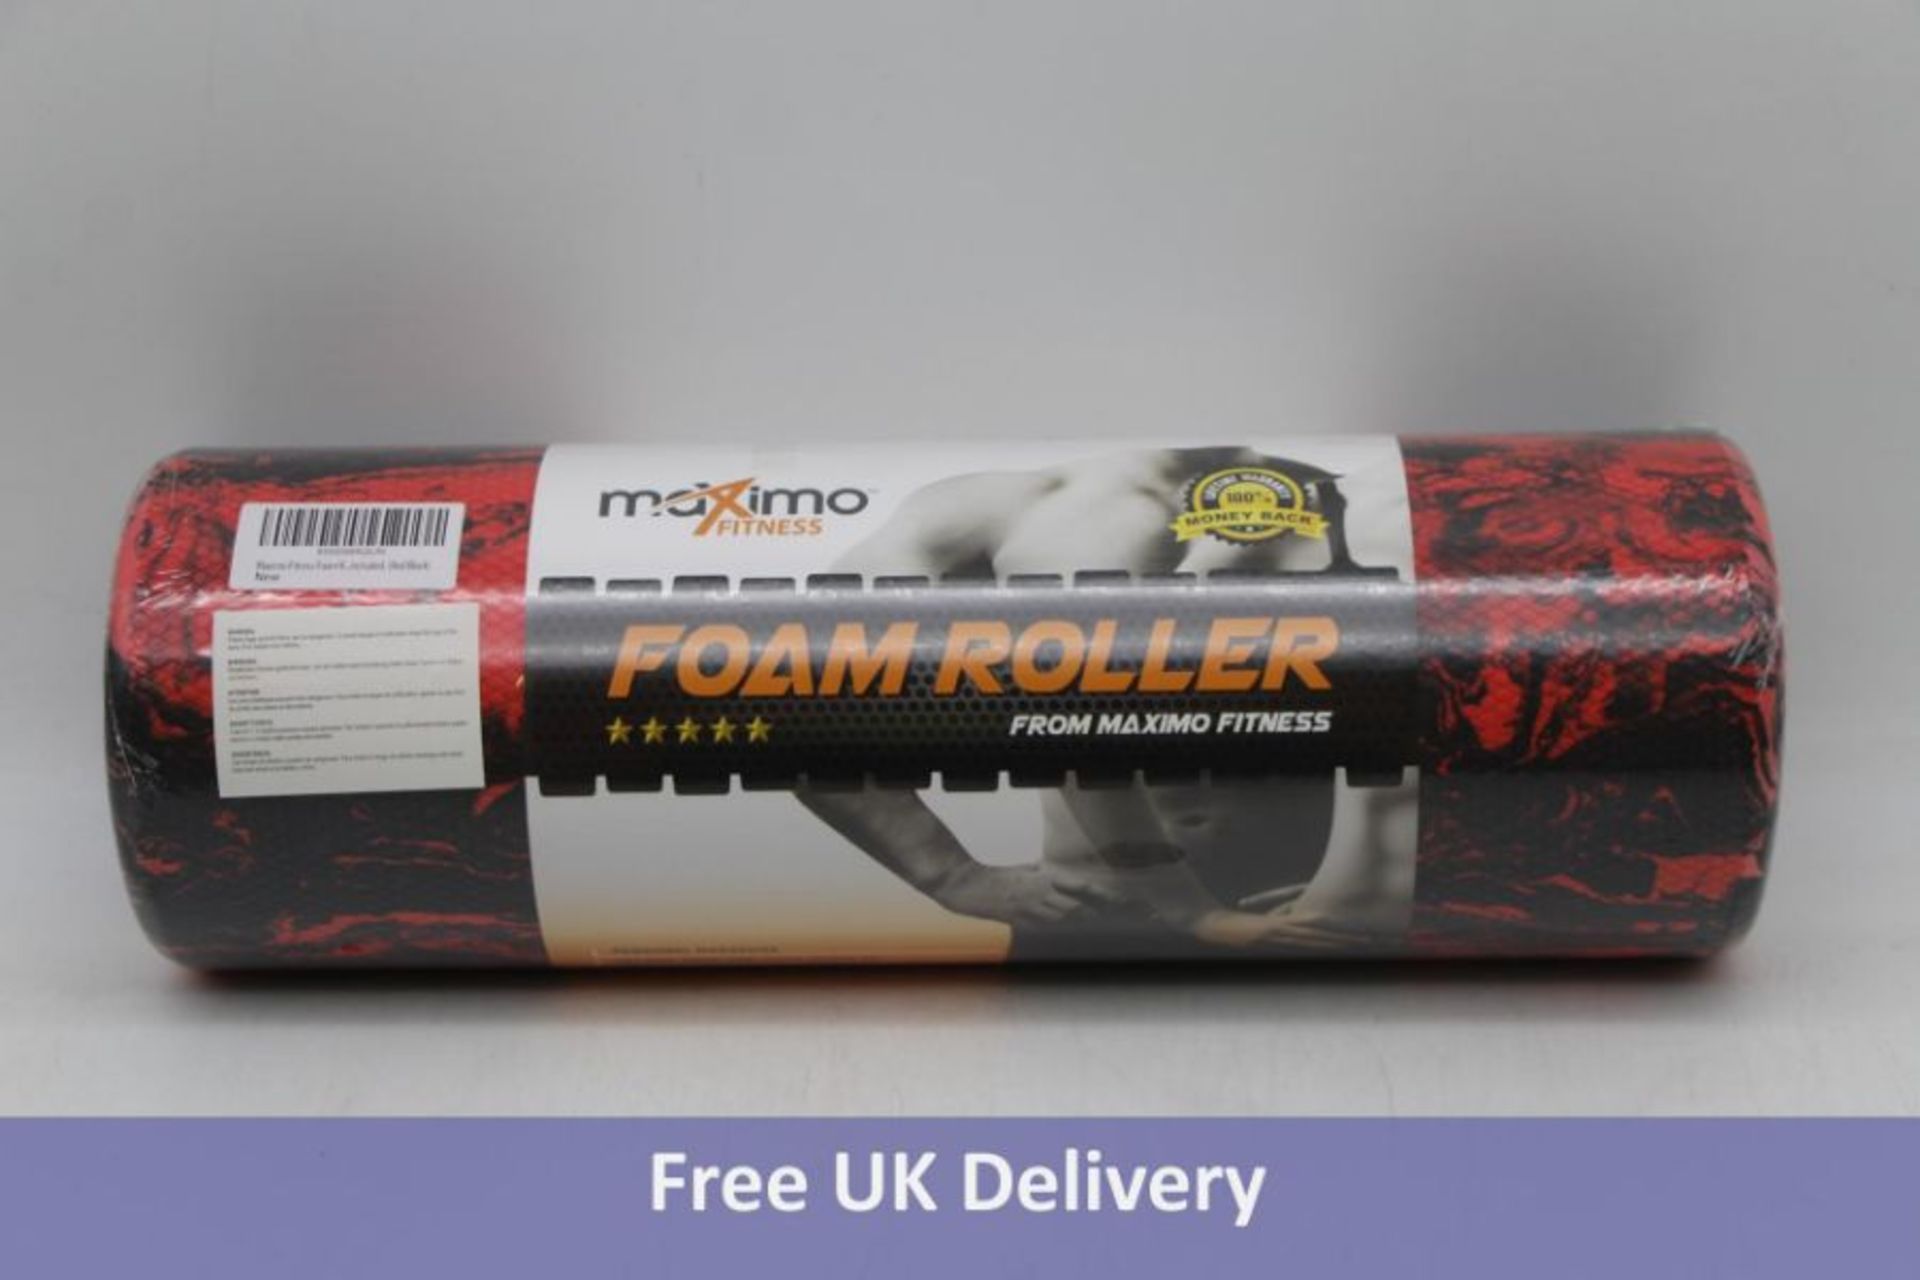 Sixteen Maximo Fitness Foam Rollers, Red/Black, 15 cm x 45 cm